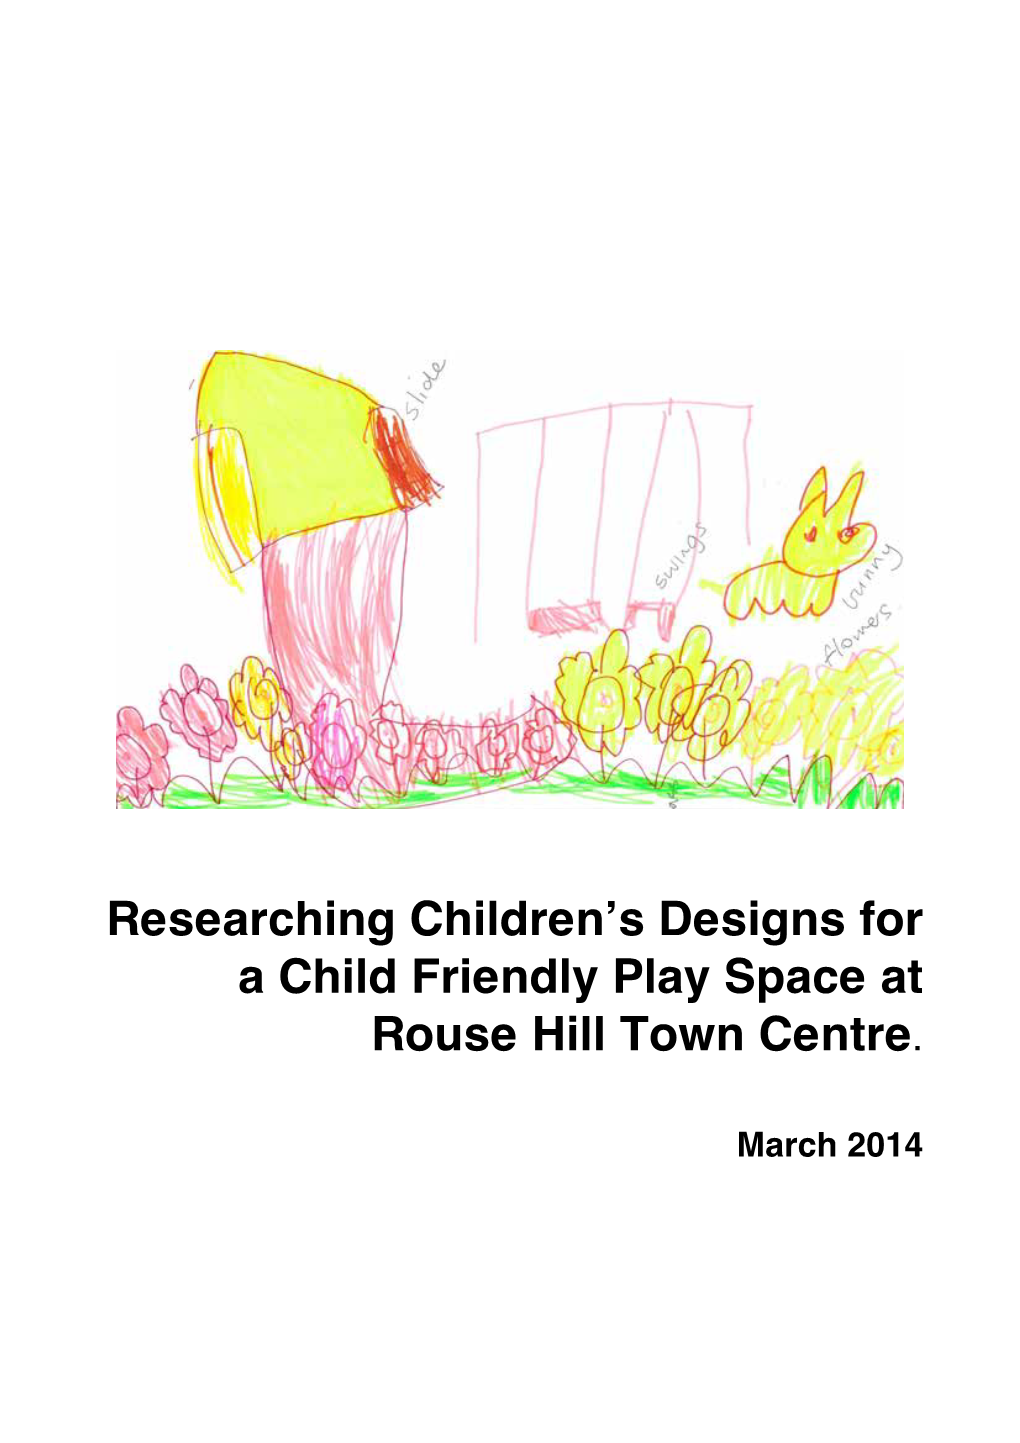 Researching Children's Designs for a Child Friendly